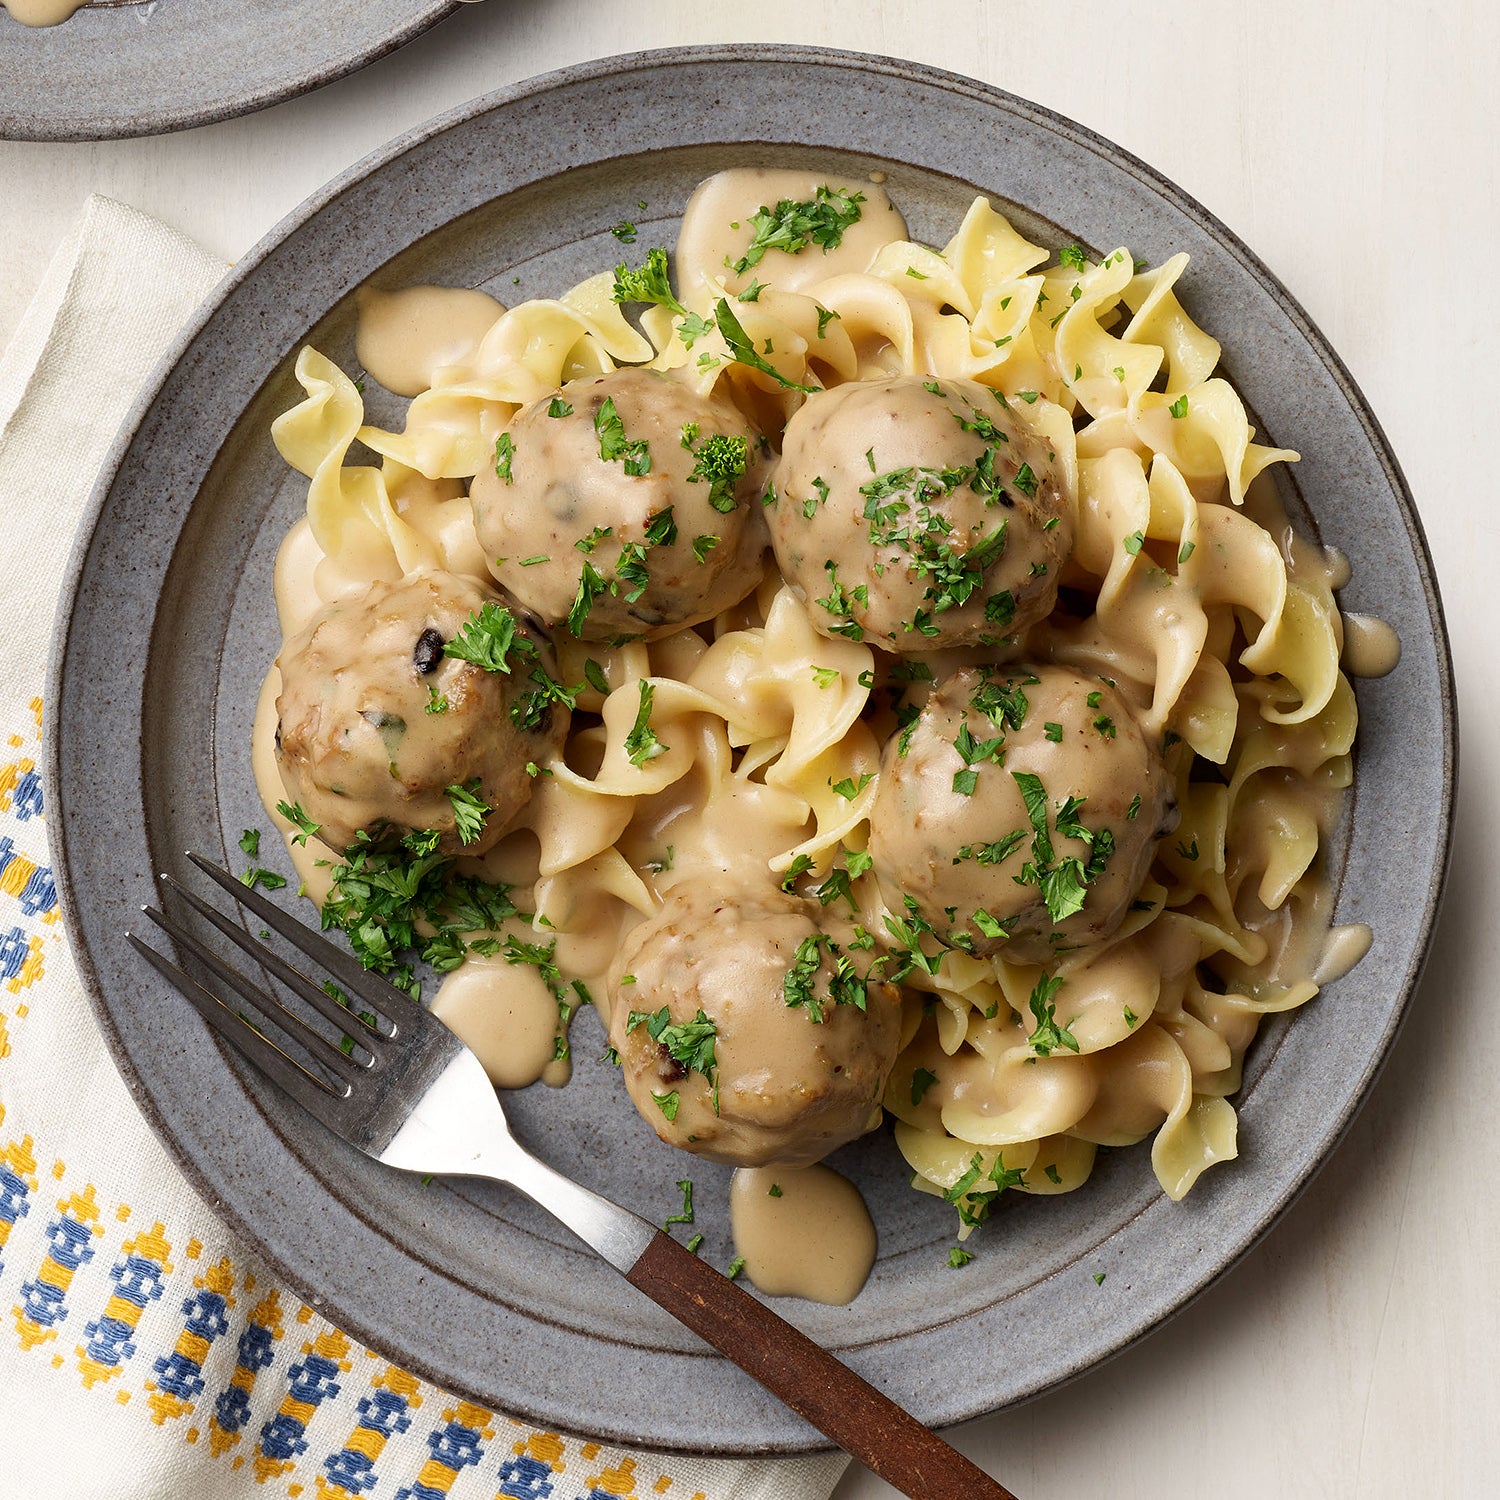 Swedish Meatball Upgrade: Turkey Meatballs with Currants in Ginger Gravy